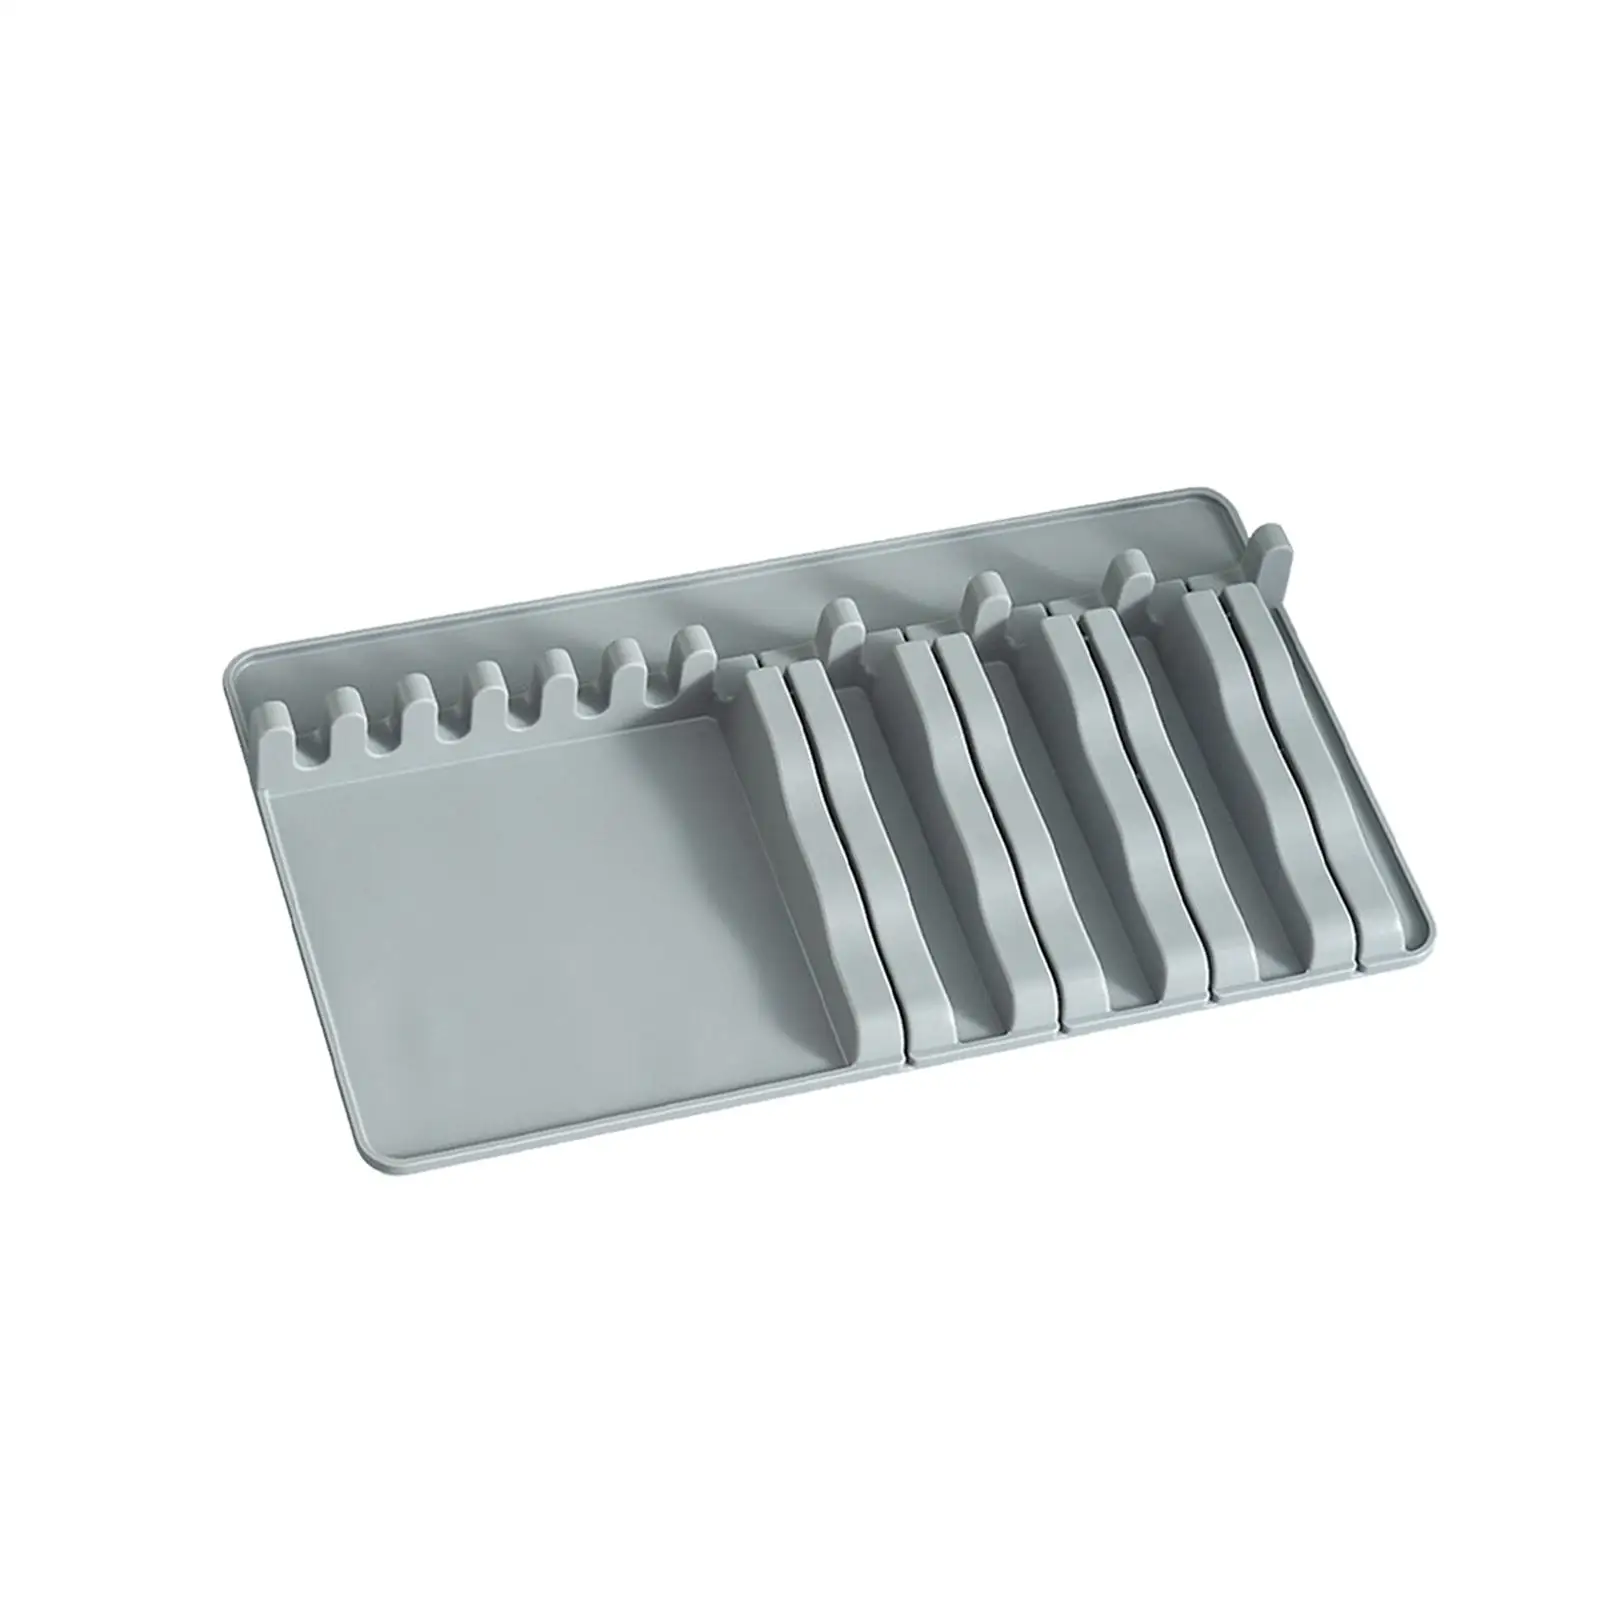 Silicone Knives Spoon Rest Organizer Rack Flexible Material Accessories Gray Color Good Ventilation with Hanging Hole Design